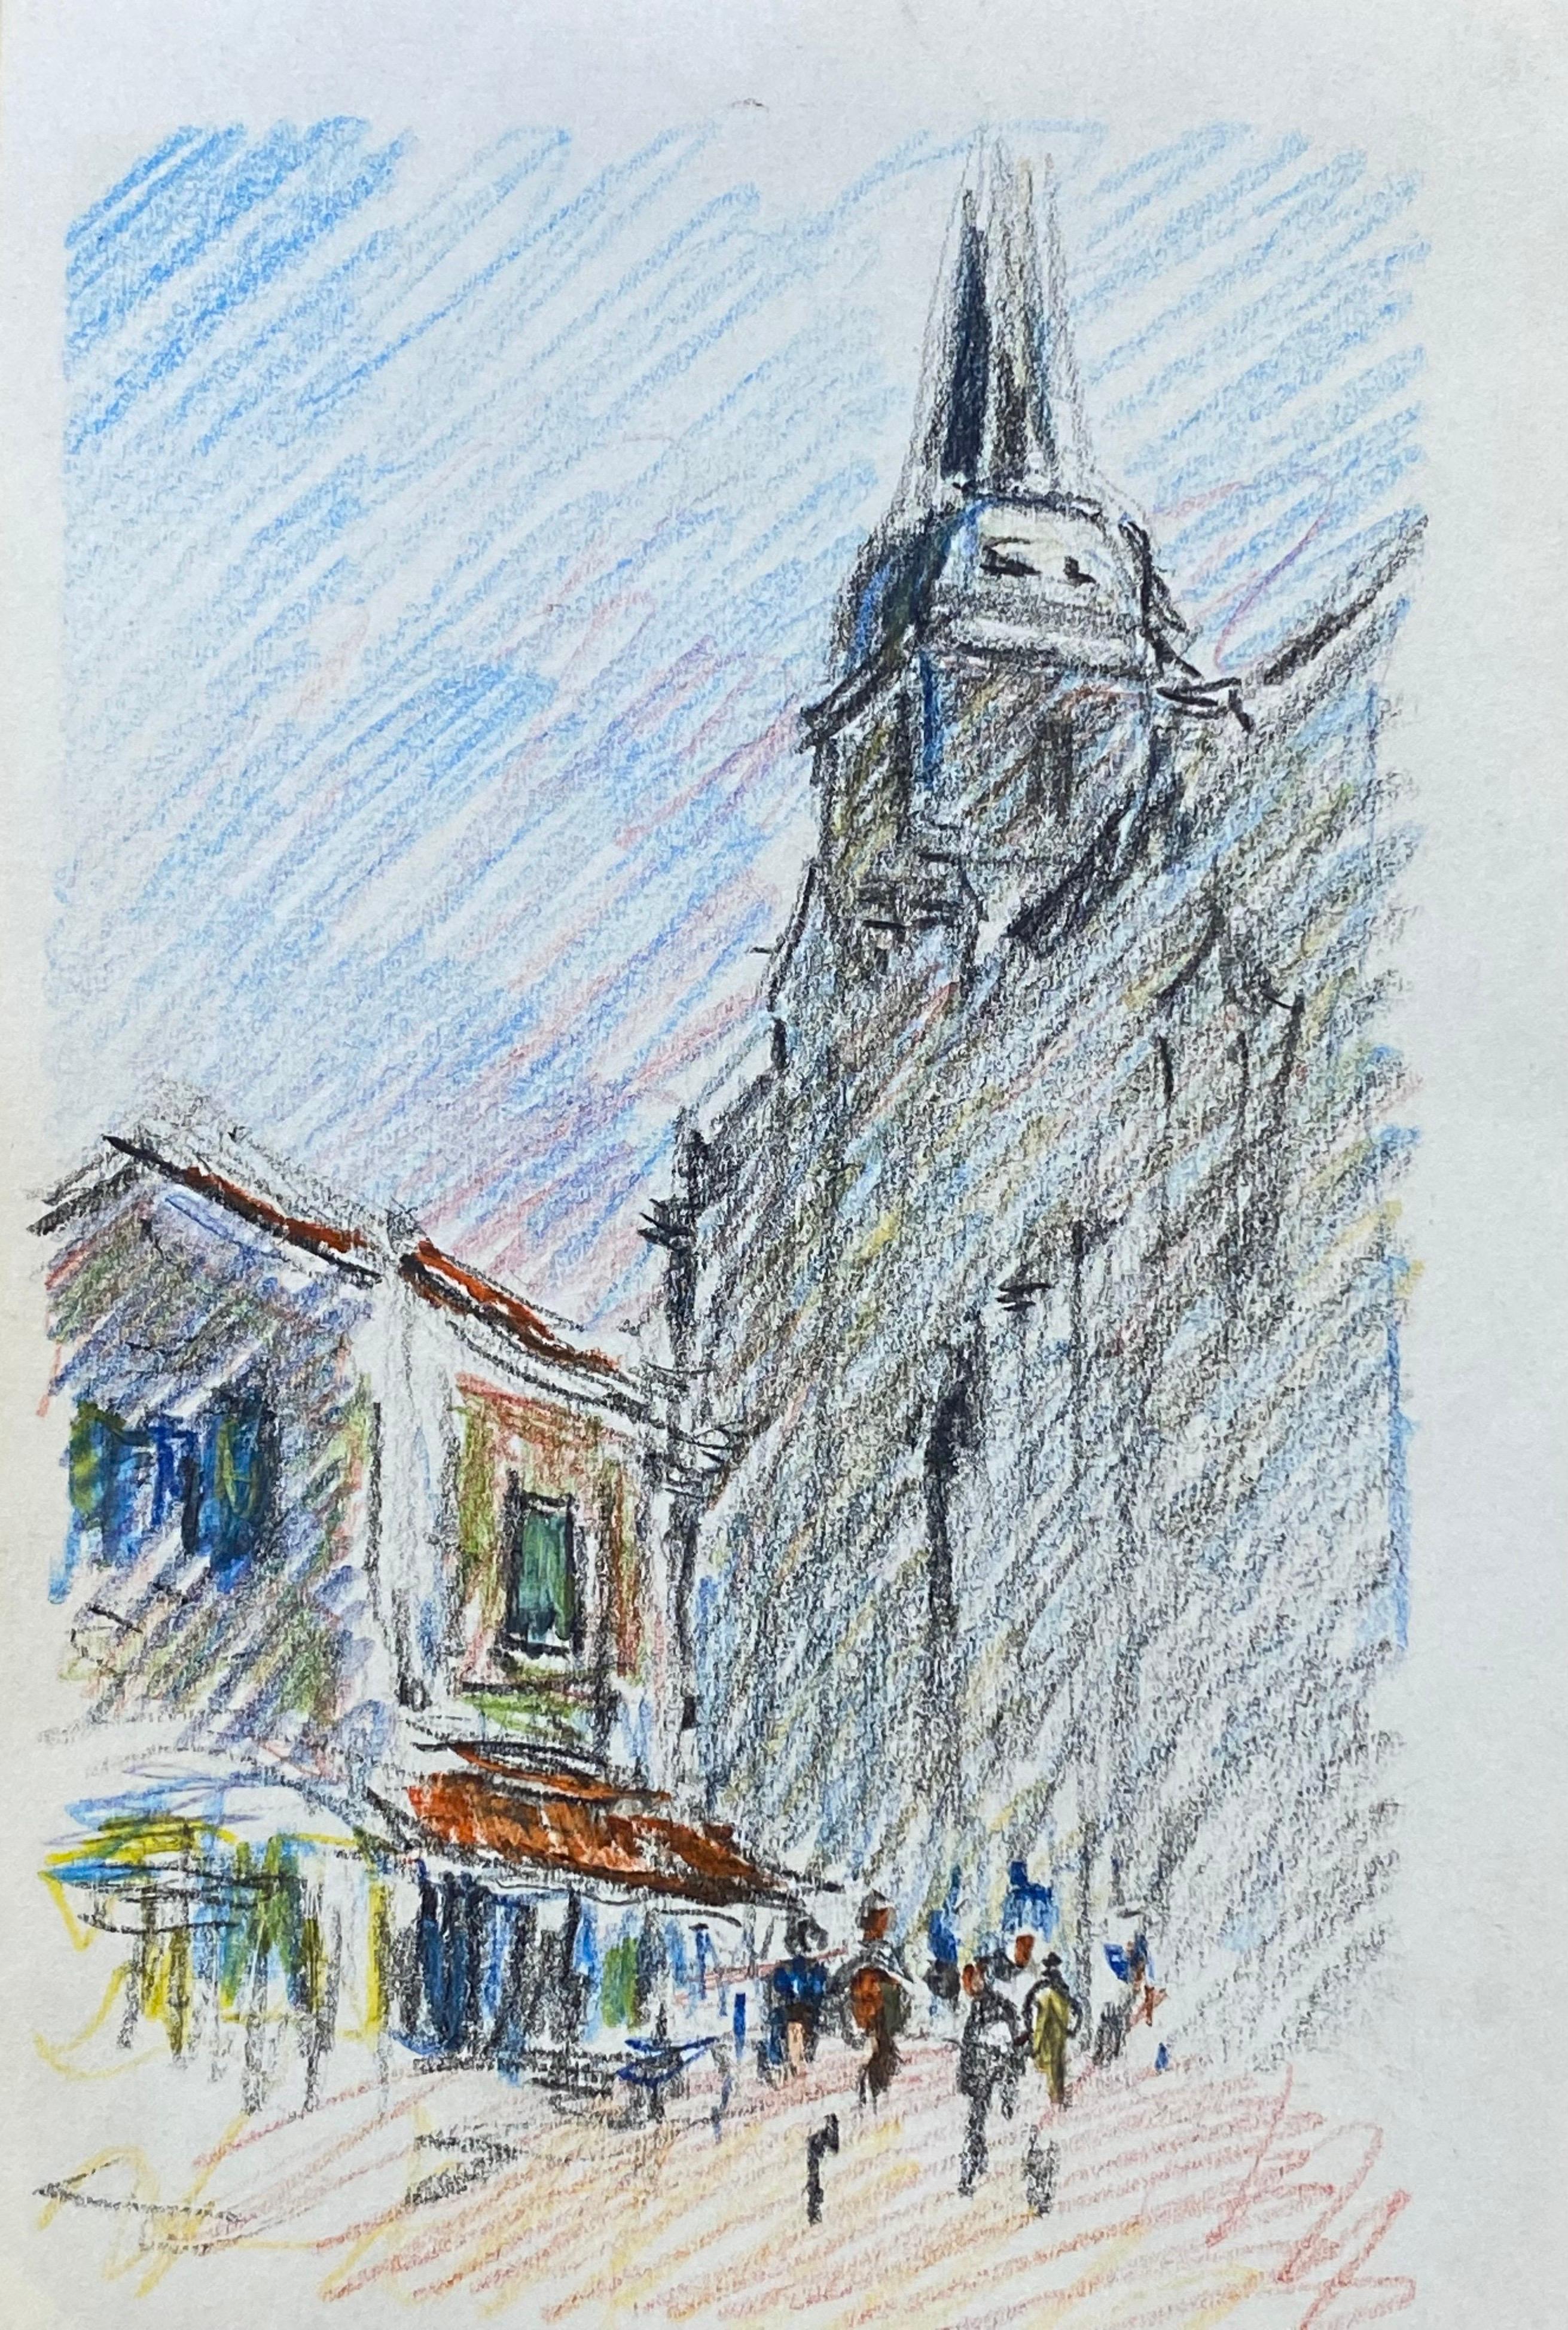 OLD PROVENCE TOWN Impressionist Crayon Drawing - Figures Mooching by Cafe